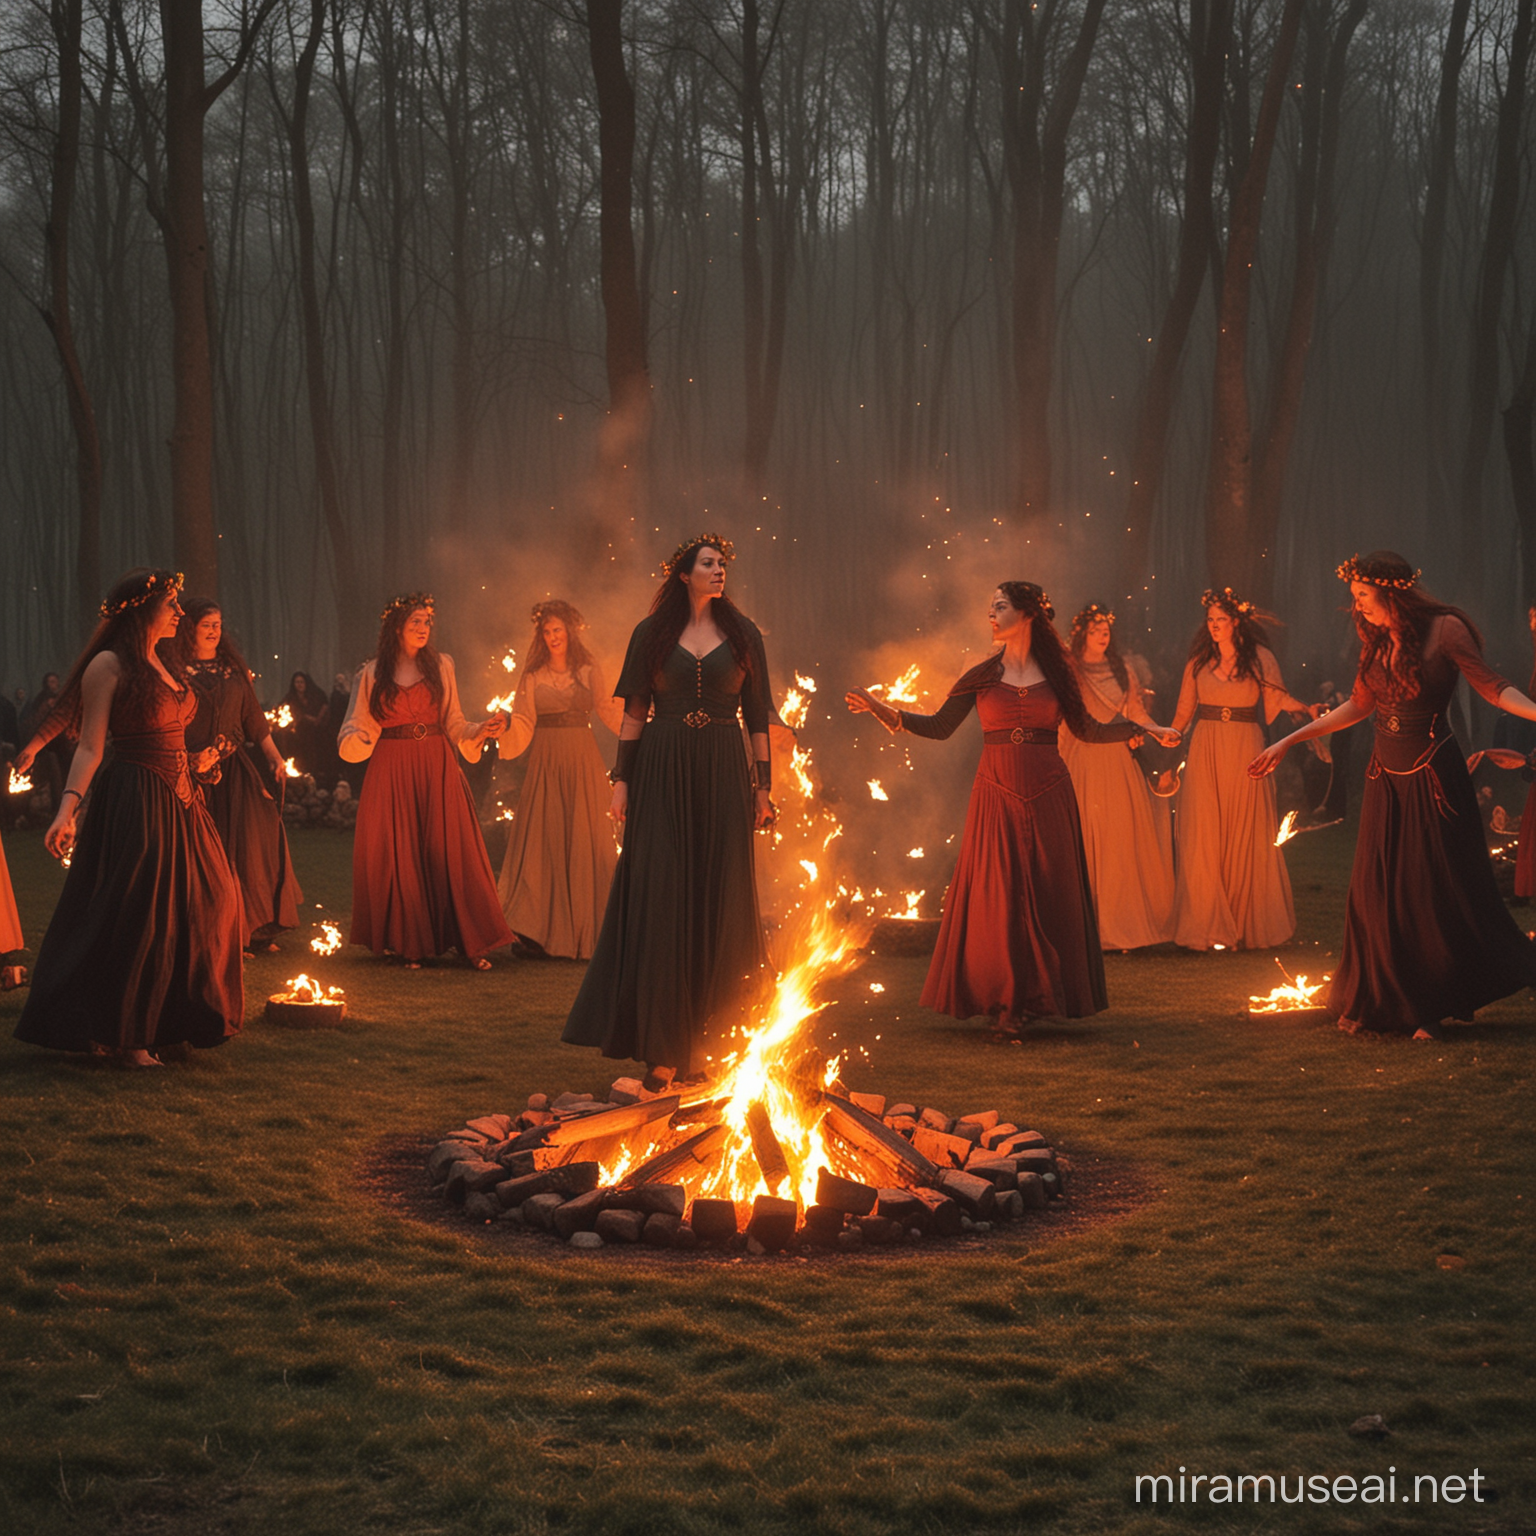 beltane fire
circles where celtic women are dancing around fires